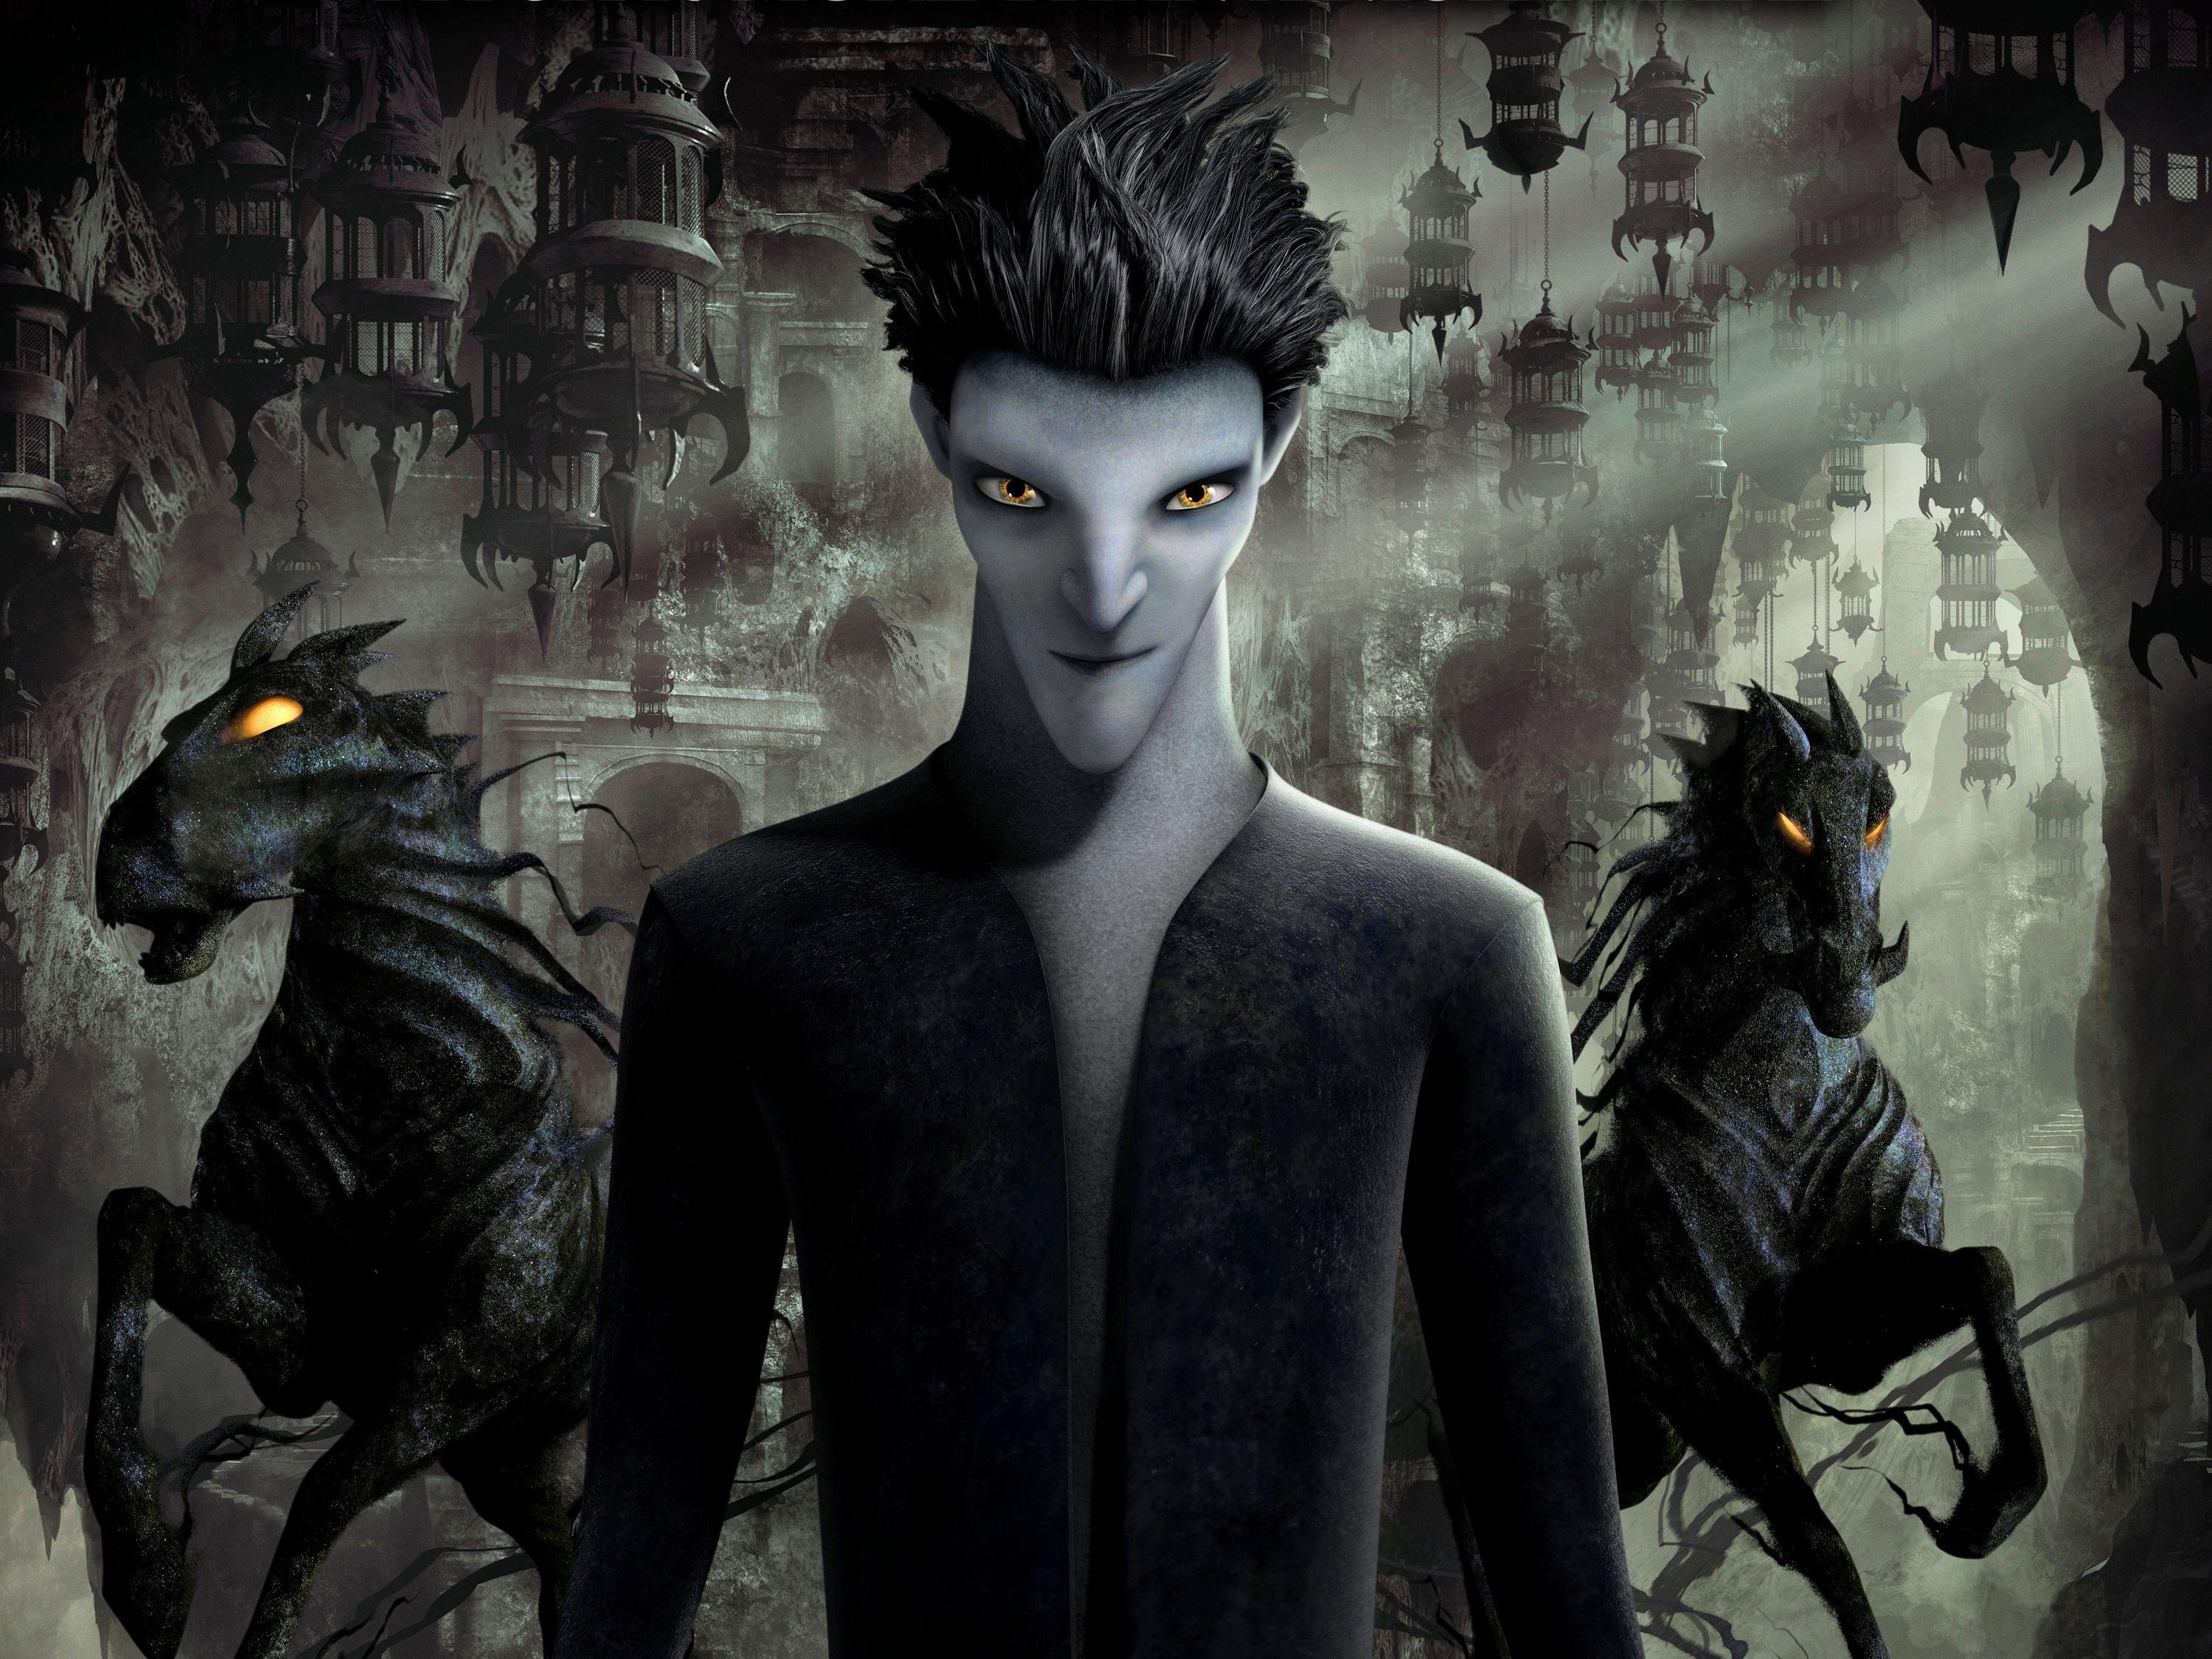 Rise Of The Guardians Wallpaper, Picture, Image